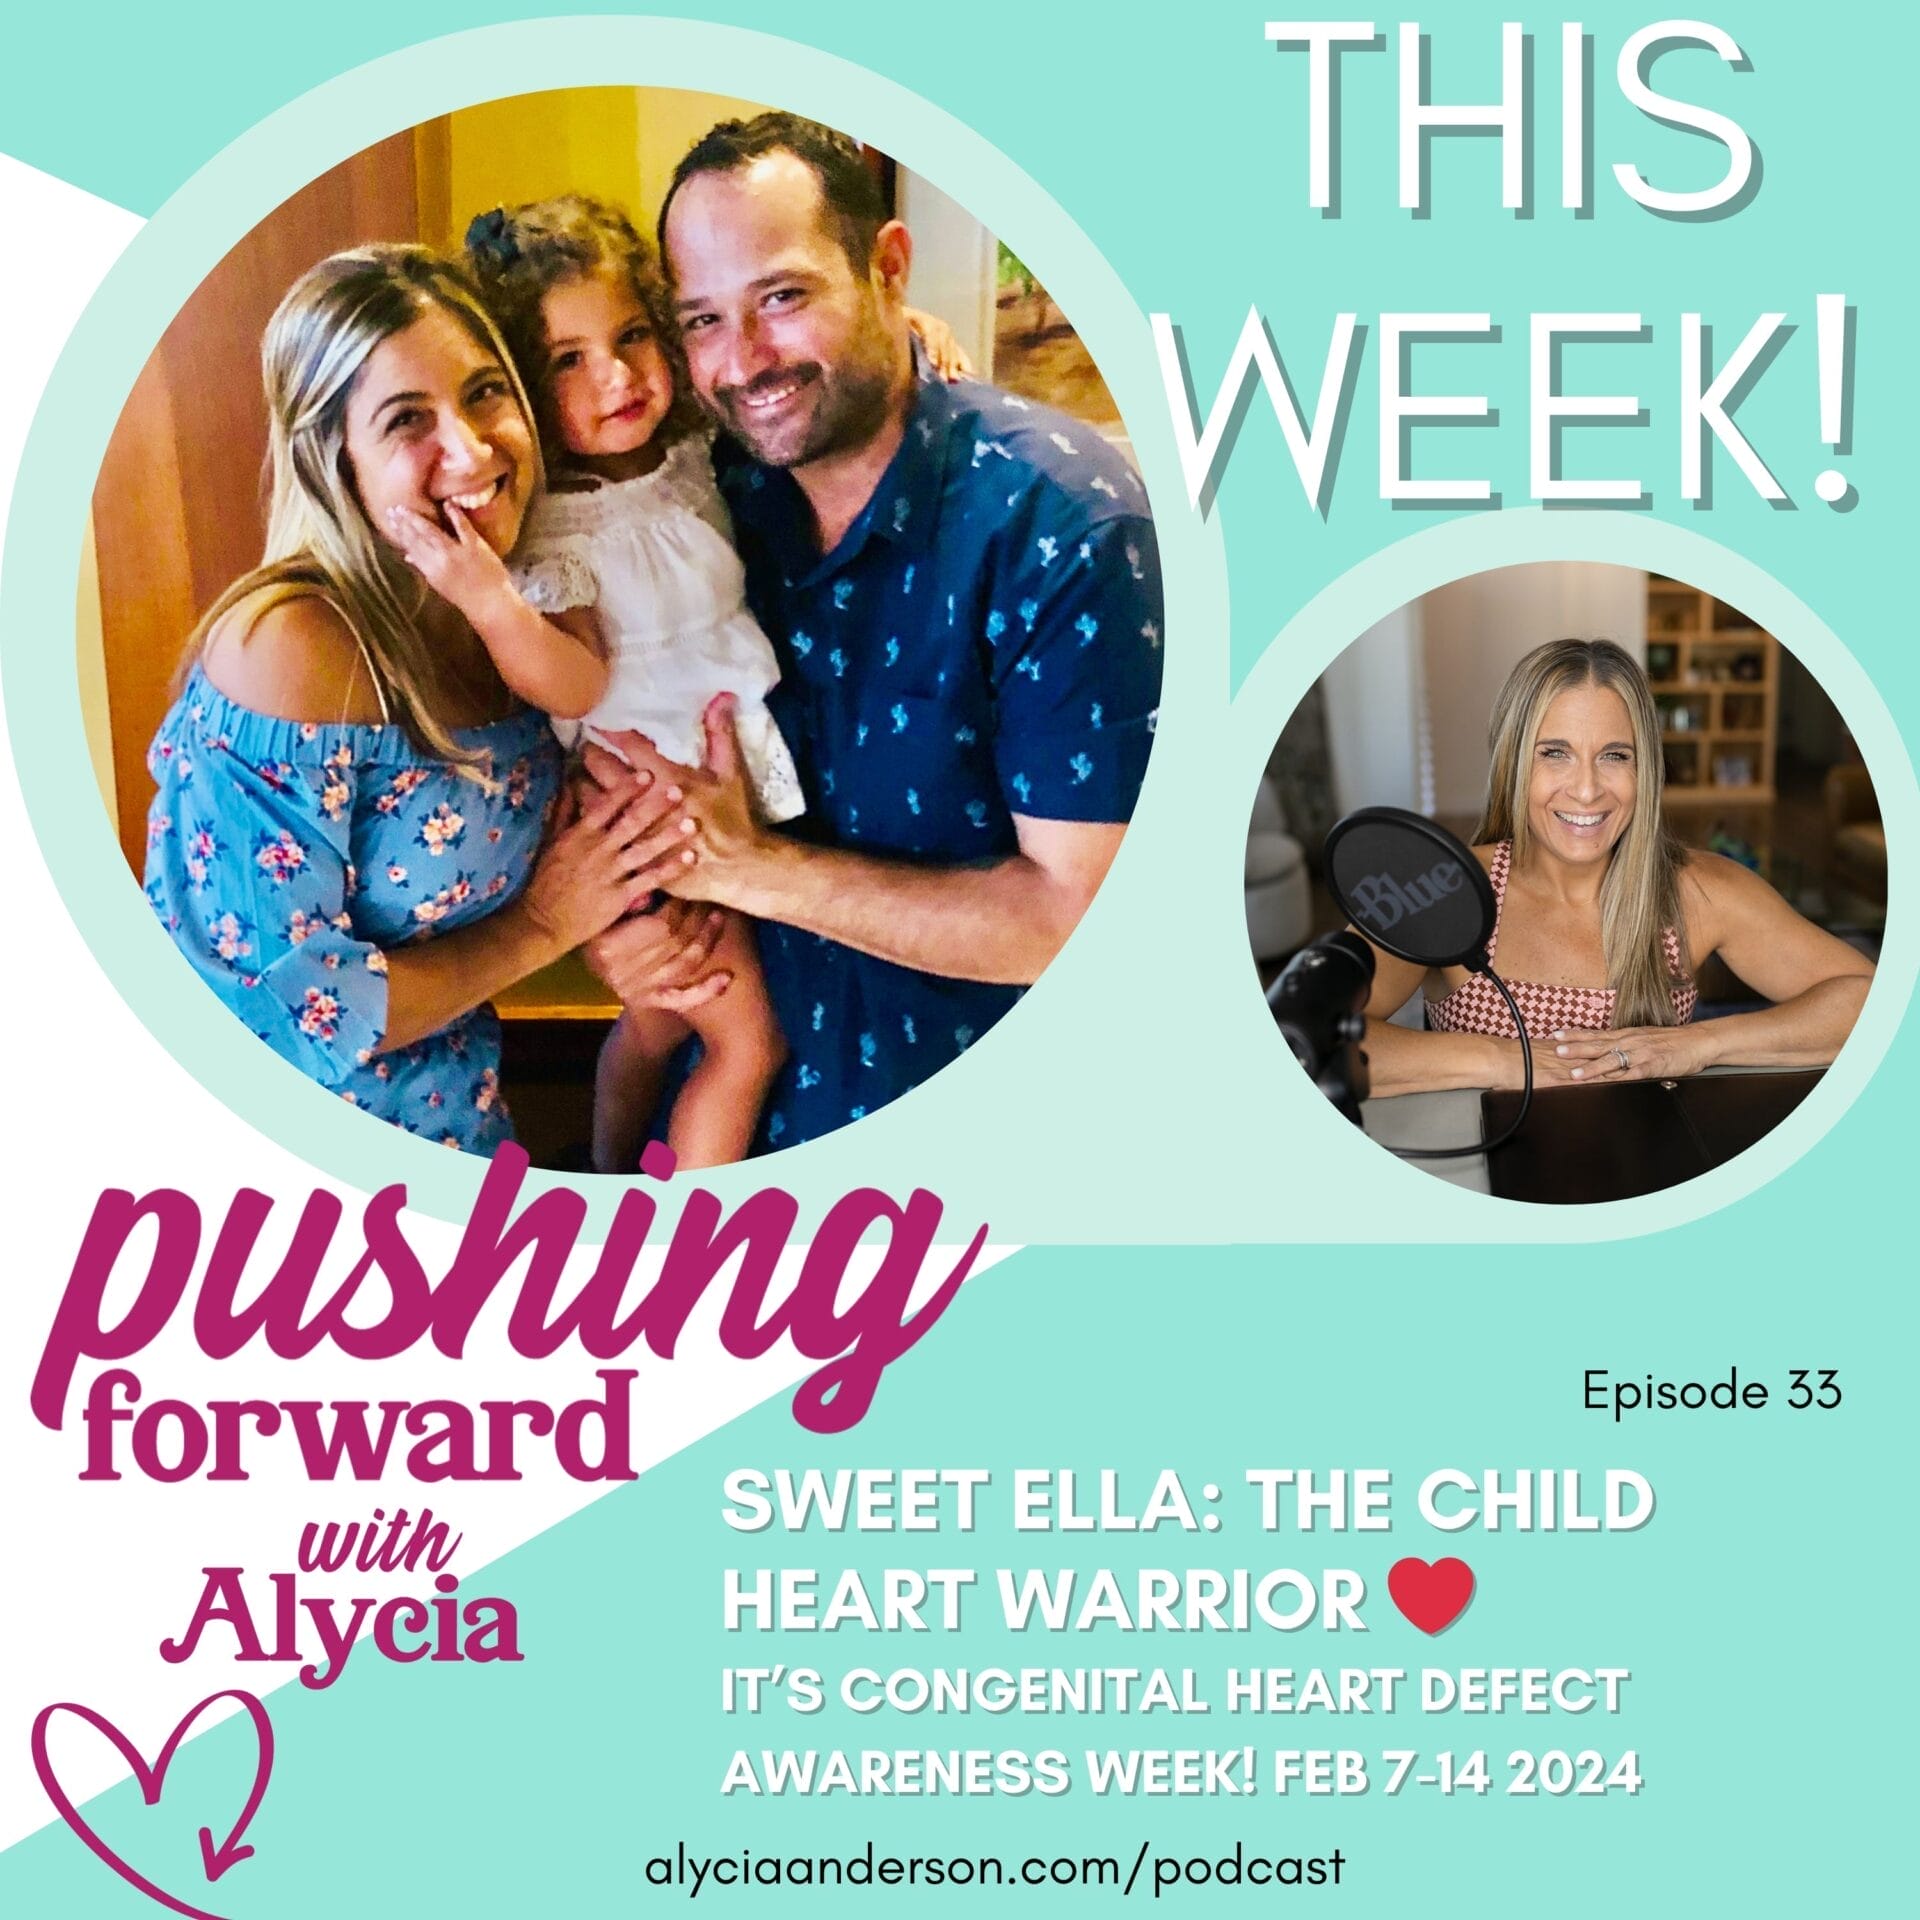 episode thirty three of pushing forward with alycia introducing her sister regina brother in law shane and niece ella and congenital heart defect c h d